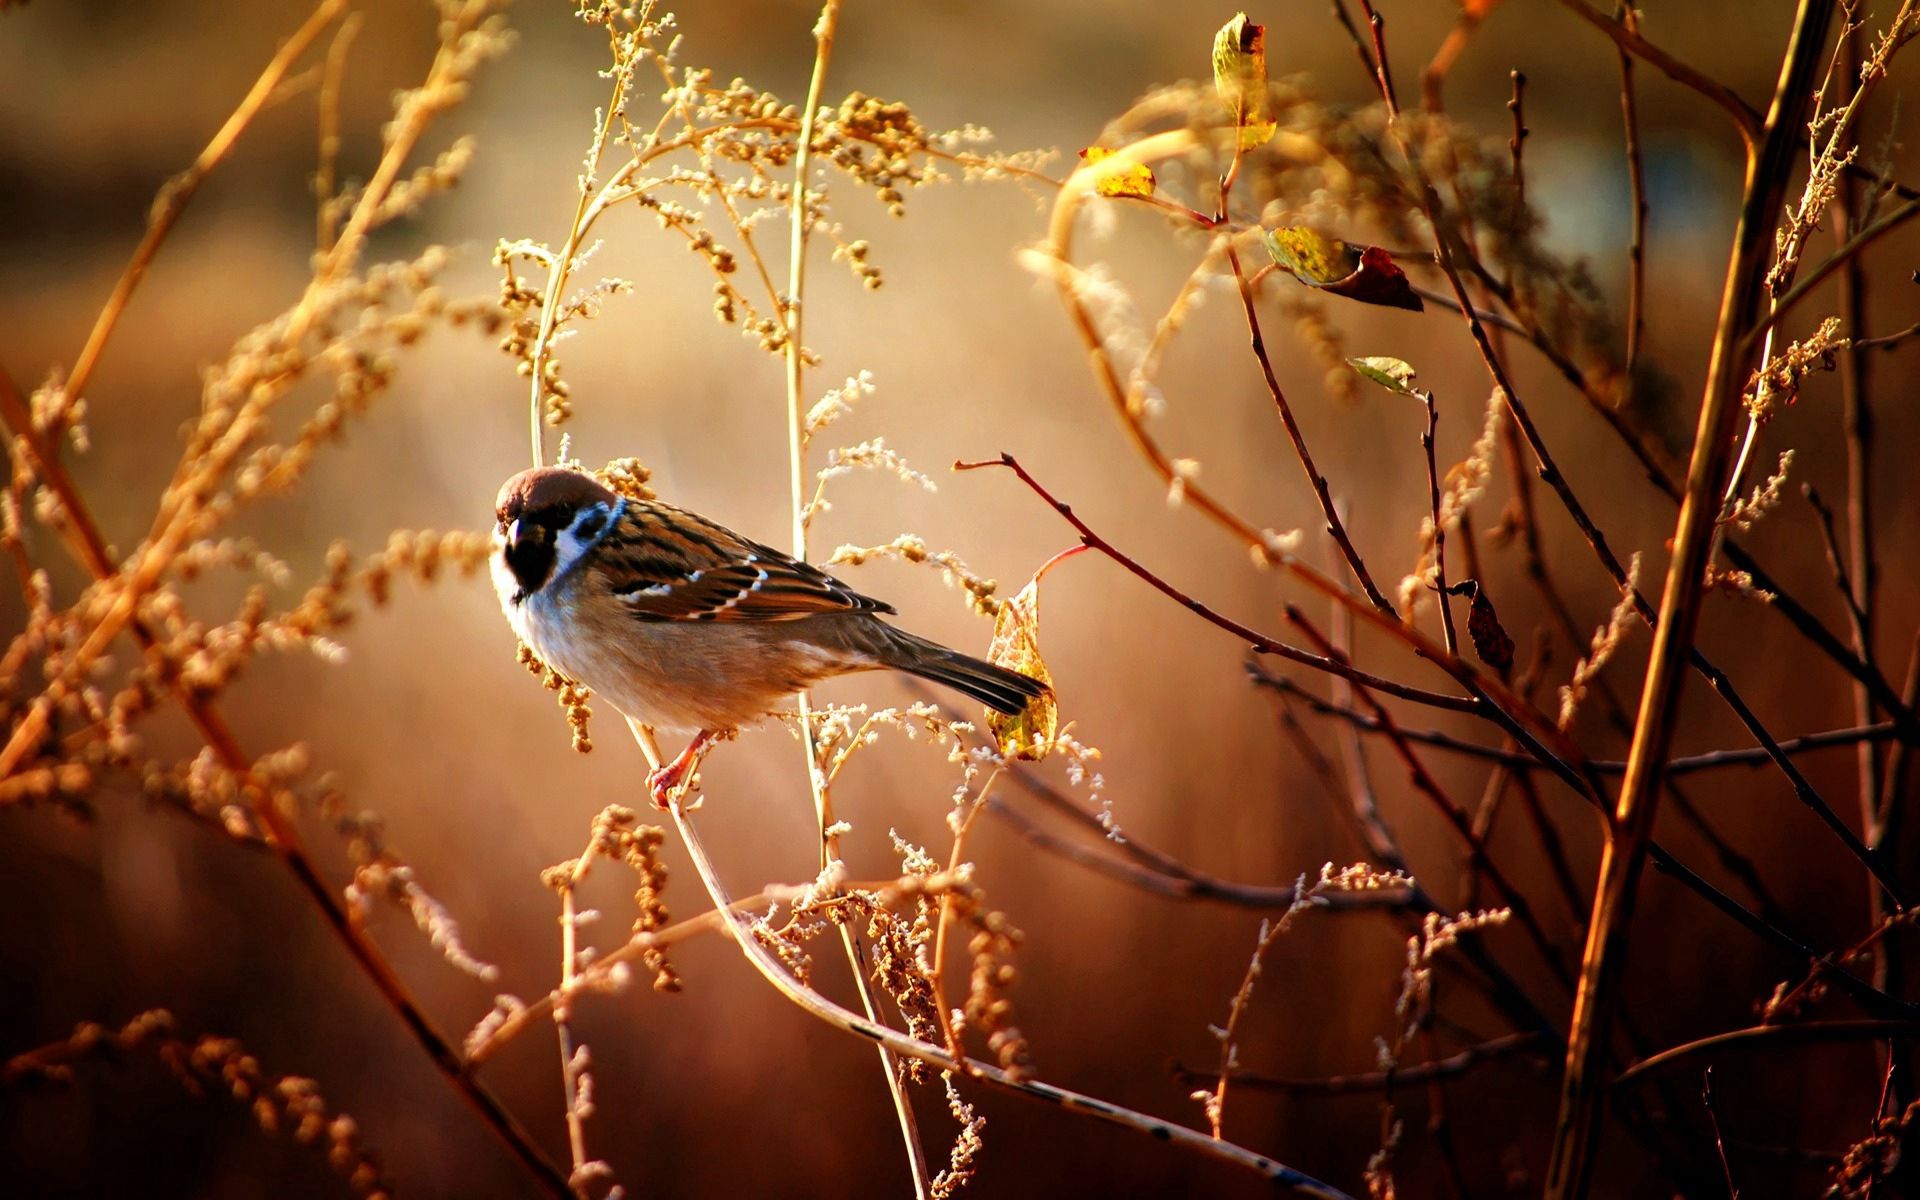 Windows Backgrounds bird, animals, flowers, wood, tree, sparrow, branches